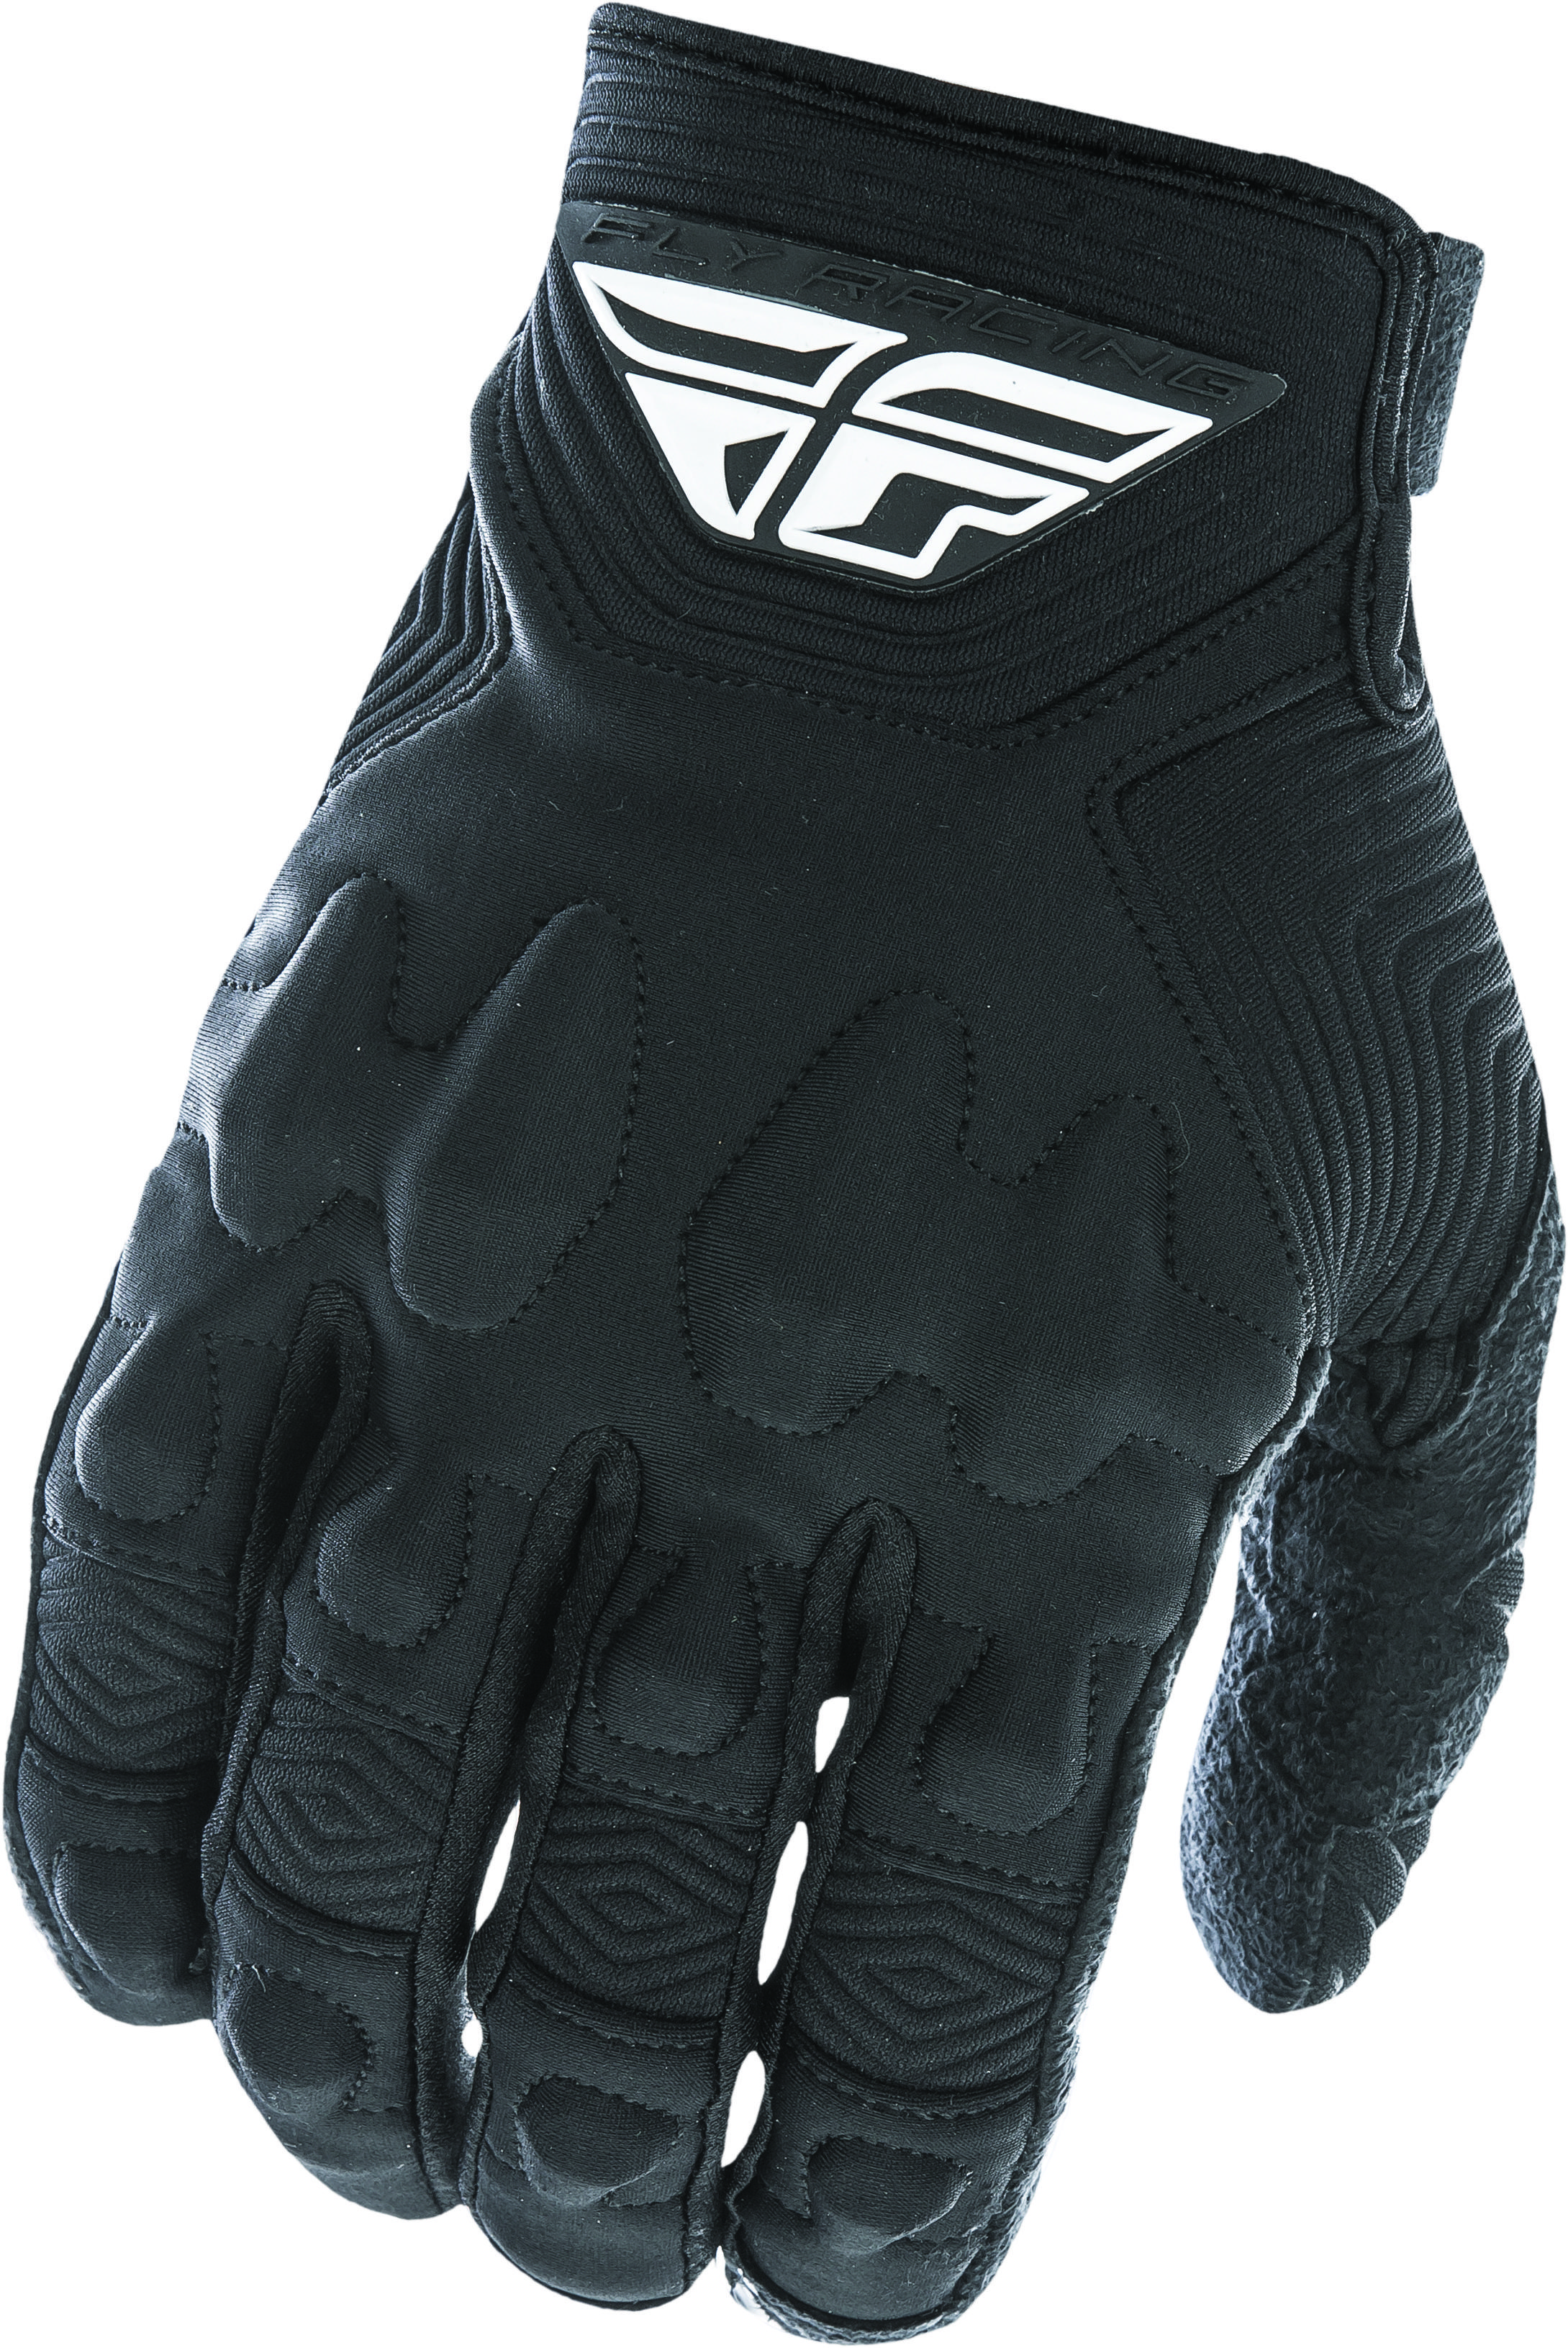 Patrol Xc Lite Riding Gloves For MX & Off-Road Black Size 11 - Click Image to Close